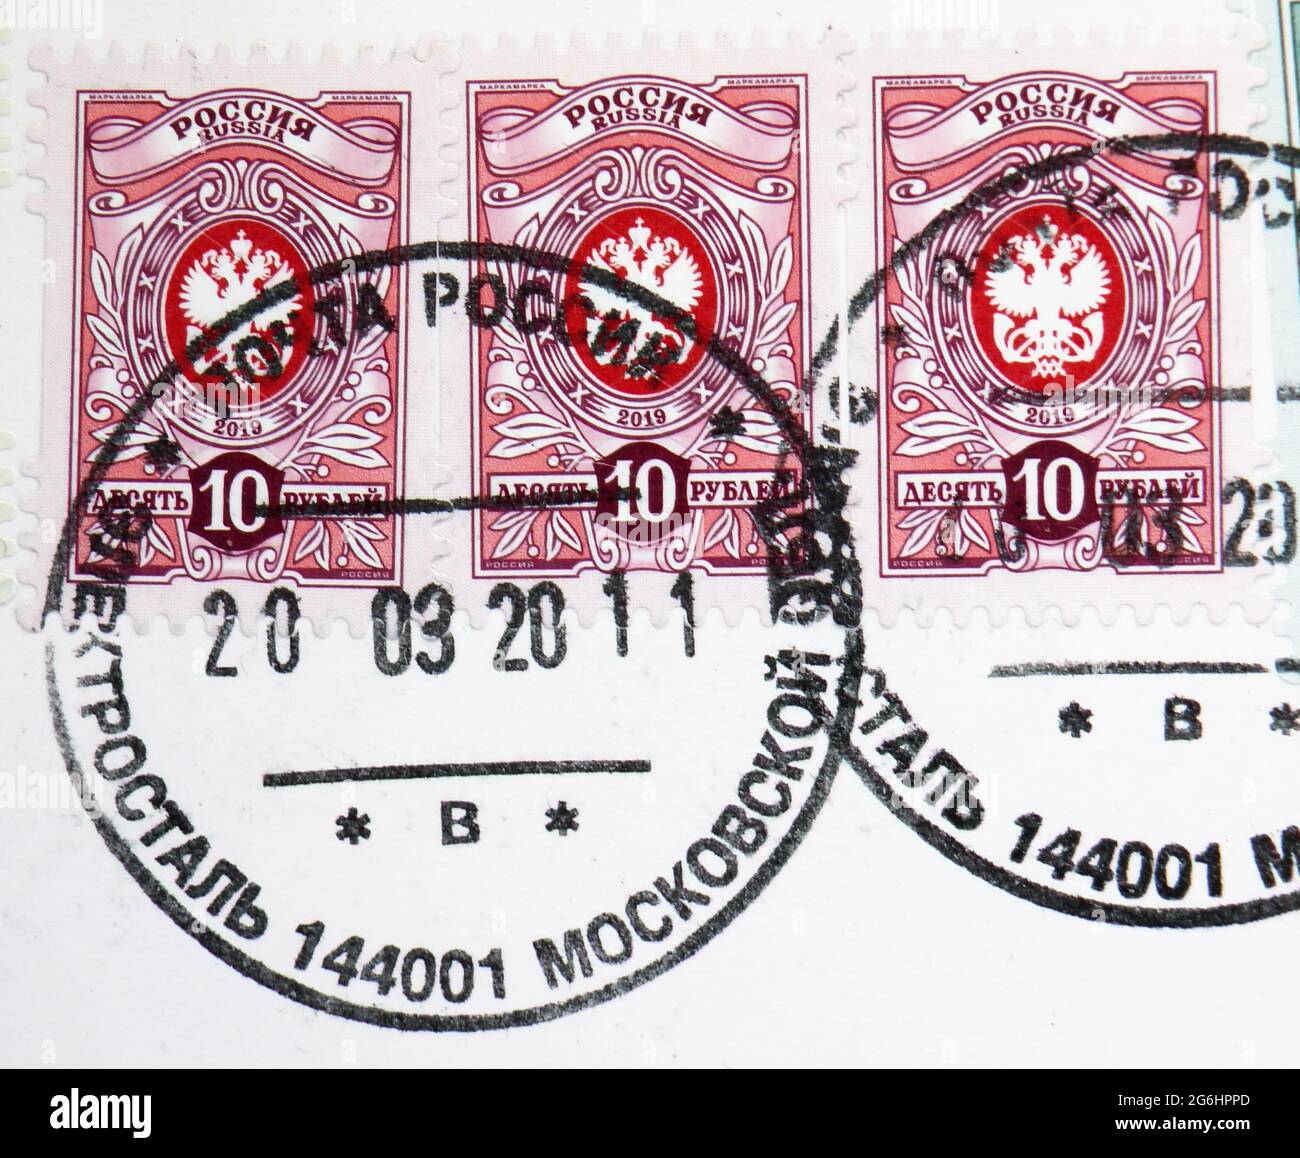 MOSCOW, RUSSIA - MAY 1, 2020: Postage stamp printed in Russia with stamp of Elektrostal shows State Postal Administration Emblem, 7th Definitive Issue Stock Photo